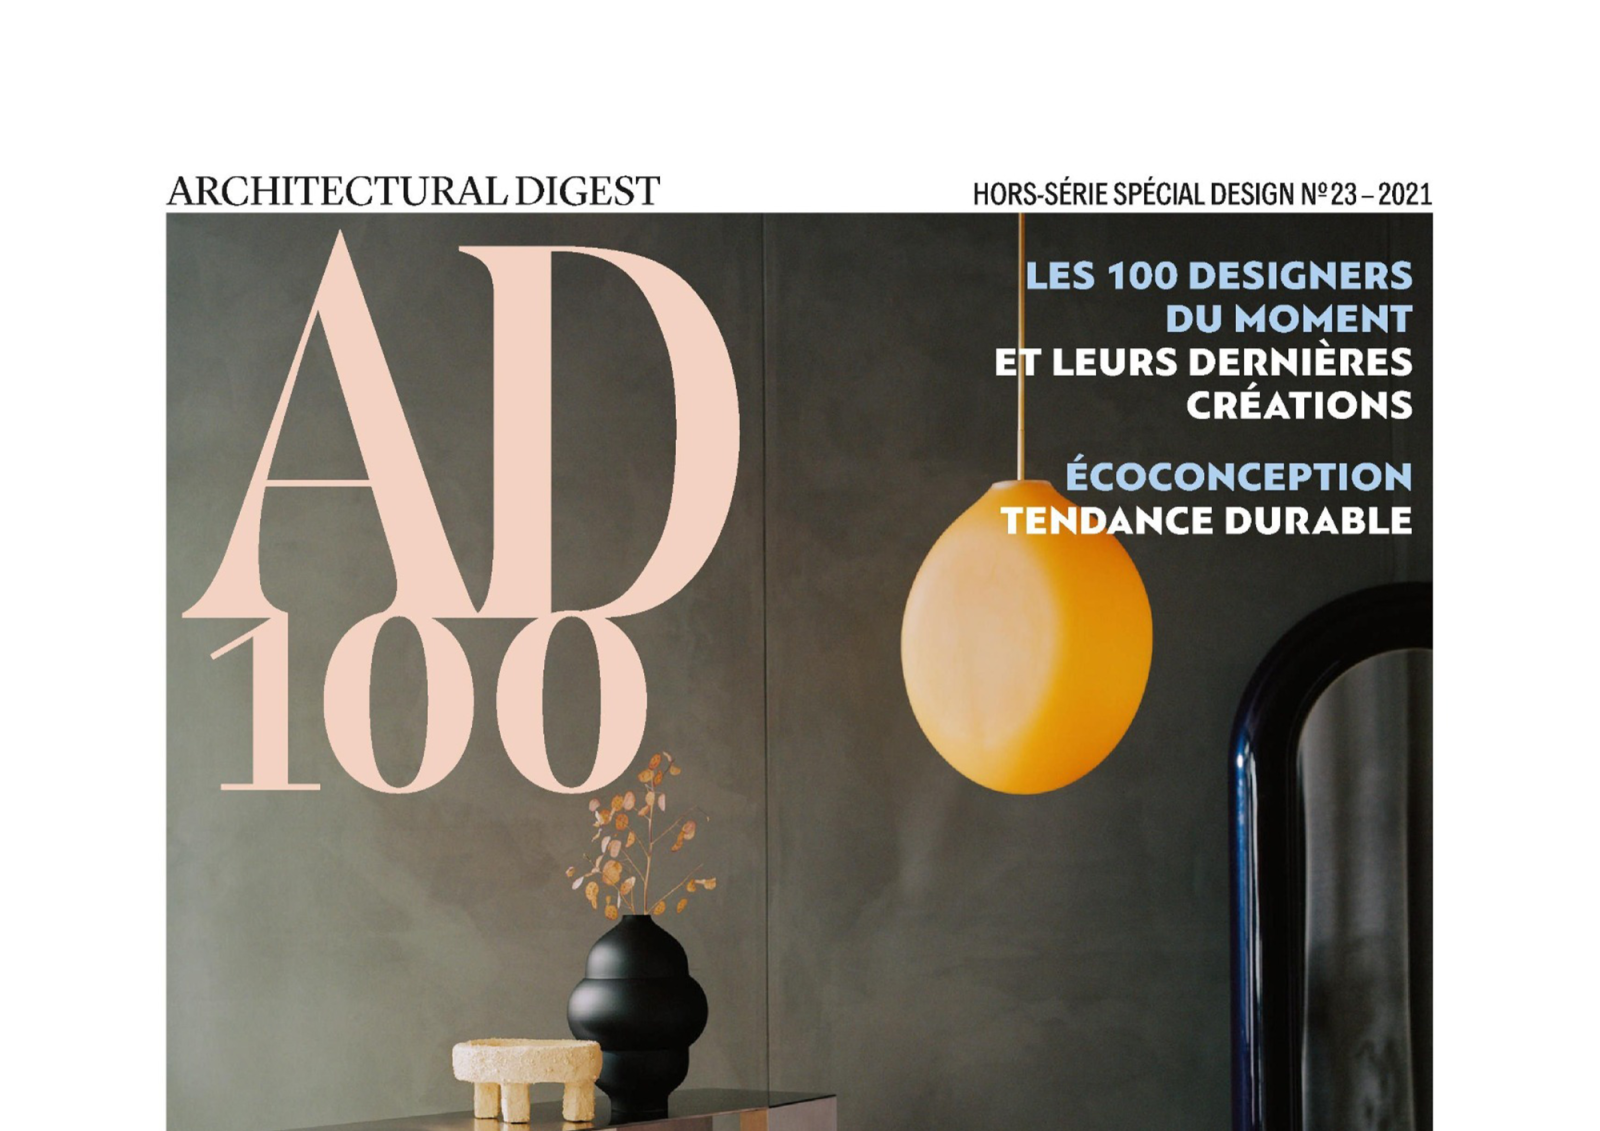 Christophe Pillet nominated as AD 100 Top Designers 2020. ENNE's unique sofa which is Avignon Sofa selected as the 